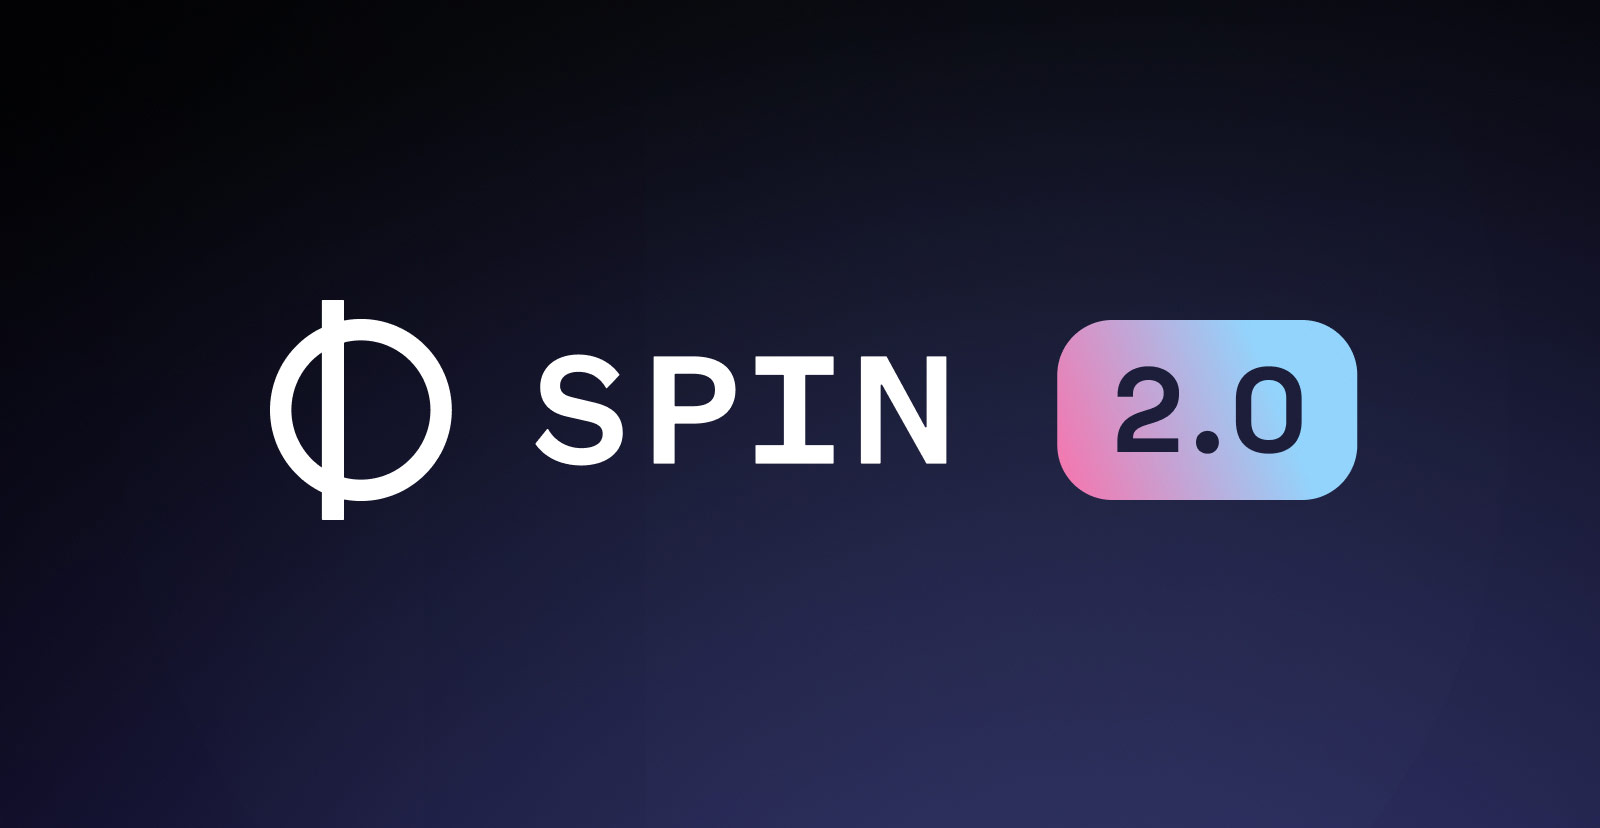 Introducing Spin 2.0